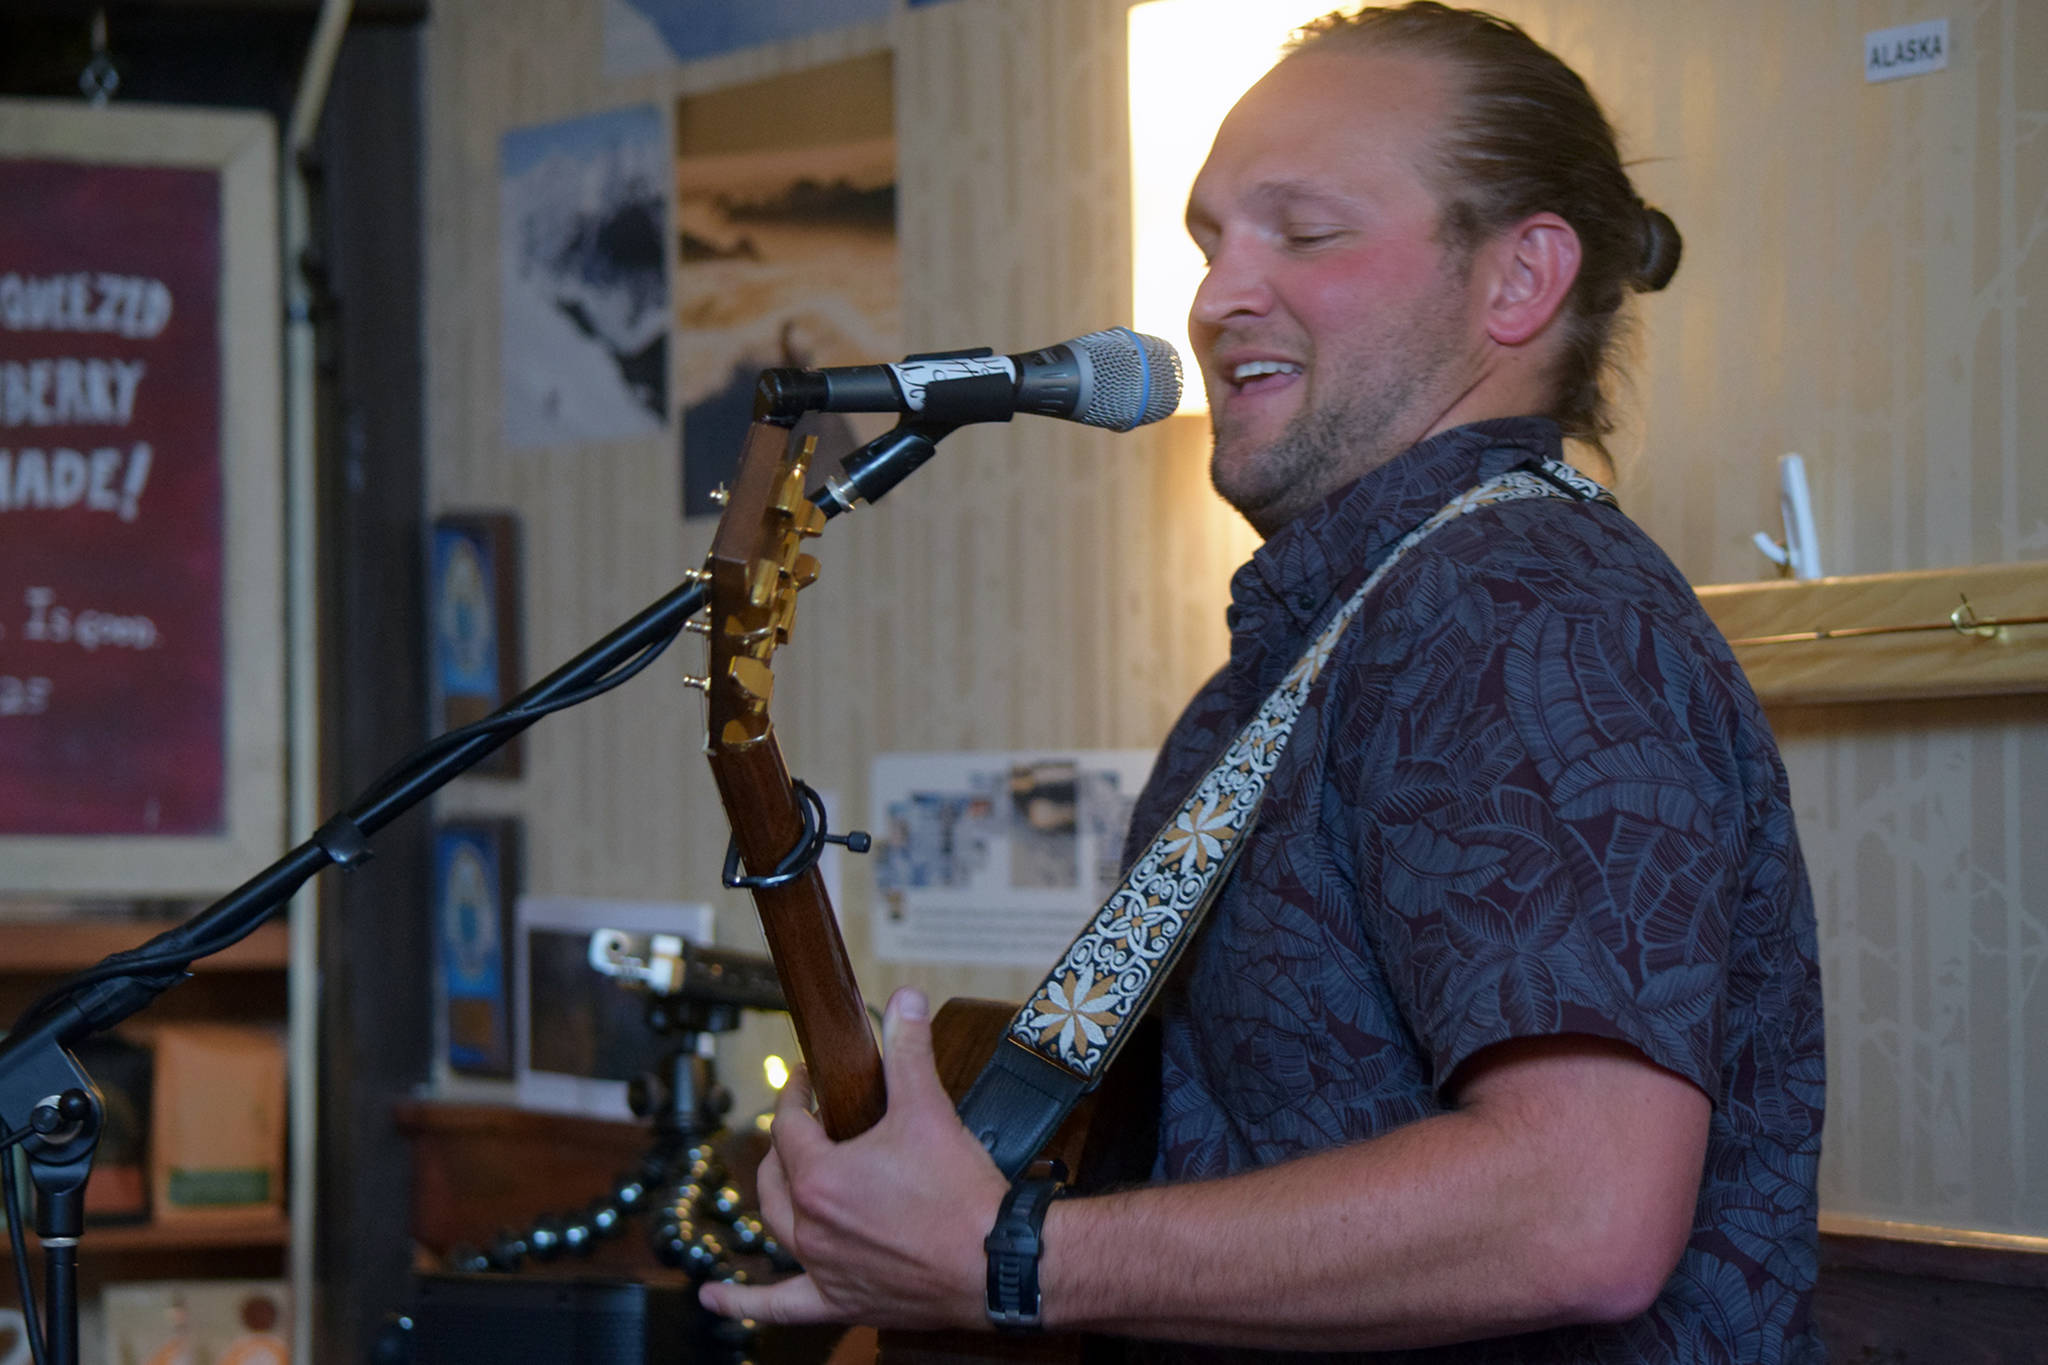 Curtiss O’Rorke Stedman, who performs as Cousin Curtiss, plays guitar at the Rookery Cafe, Wednesday, May 29, 2019. (Ben Hohenstatt | Capital City Weekly)